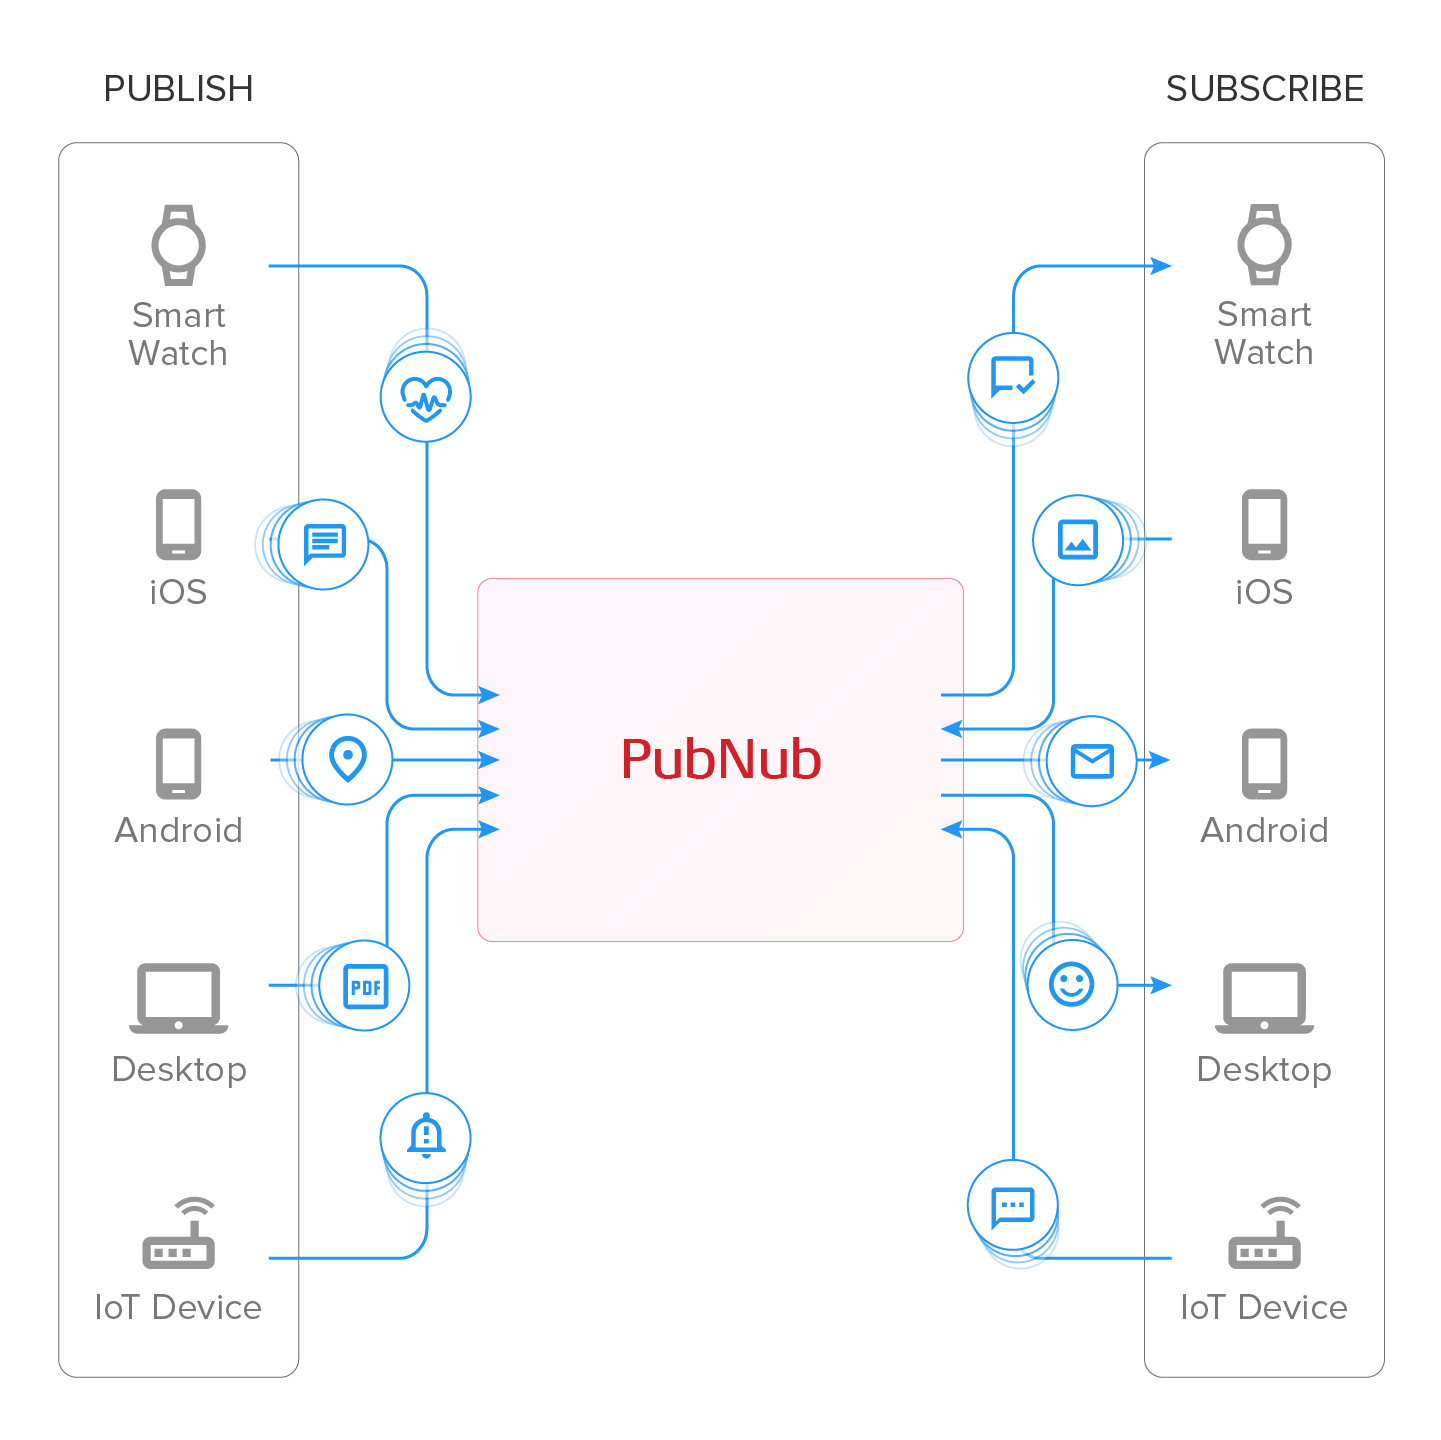 Illustration of PubNub data stream network showing publish and subscribe channels across various devices like smartwatches, iOS, Android, desktops, and IoT devices.